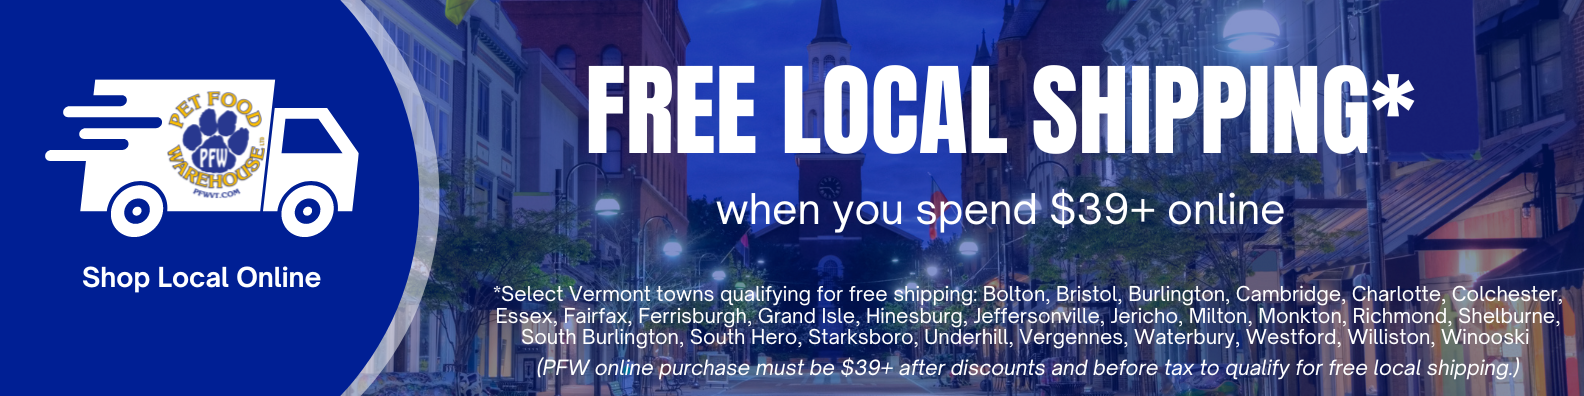 FREE Local Shipping when you spend $39+